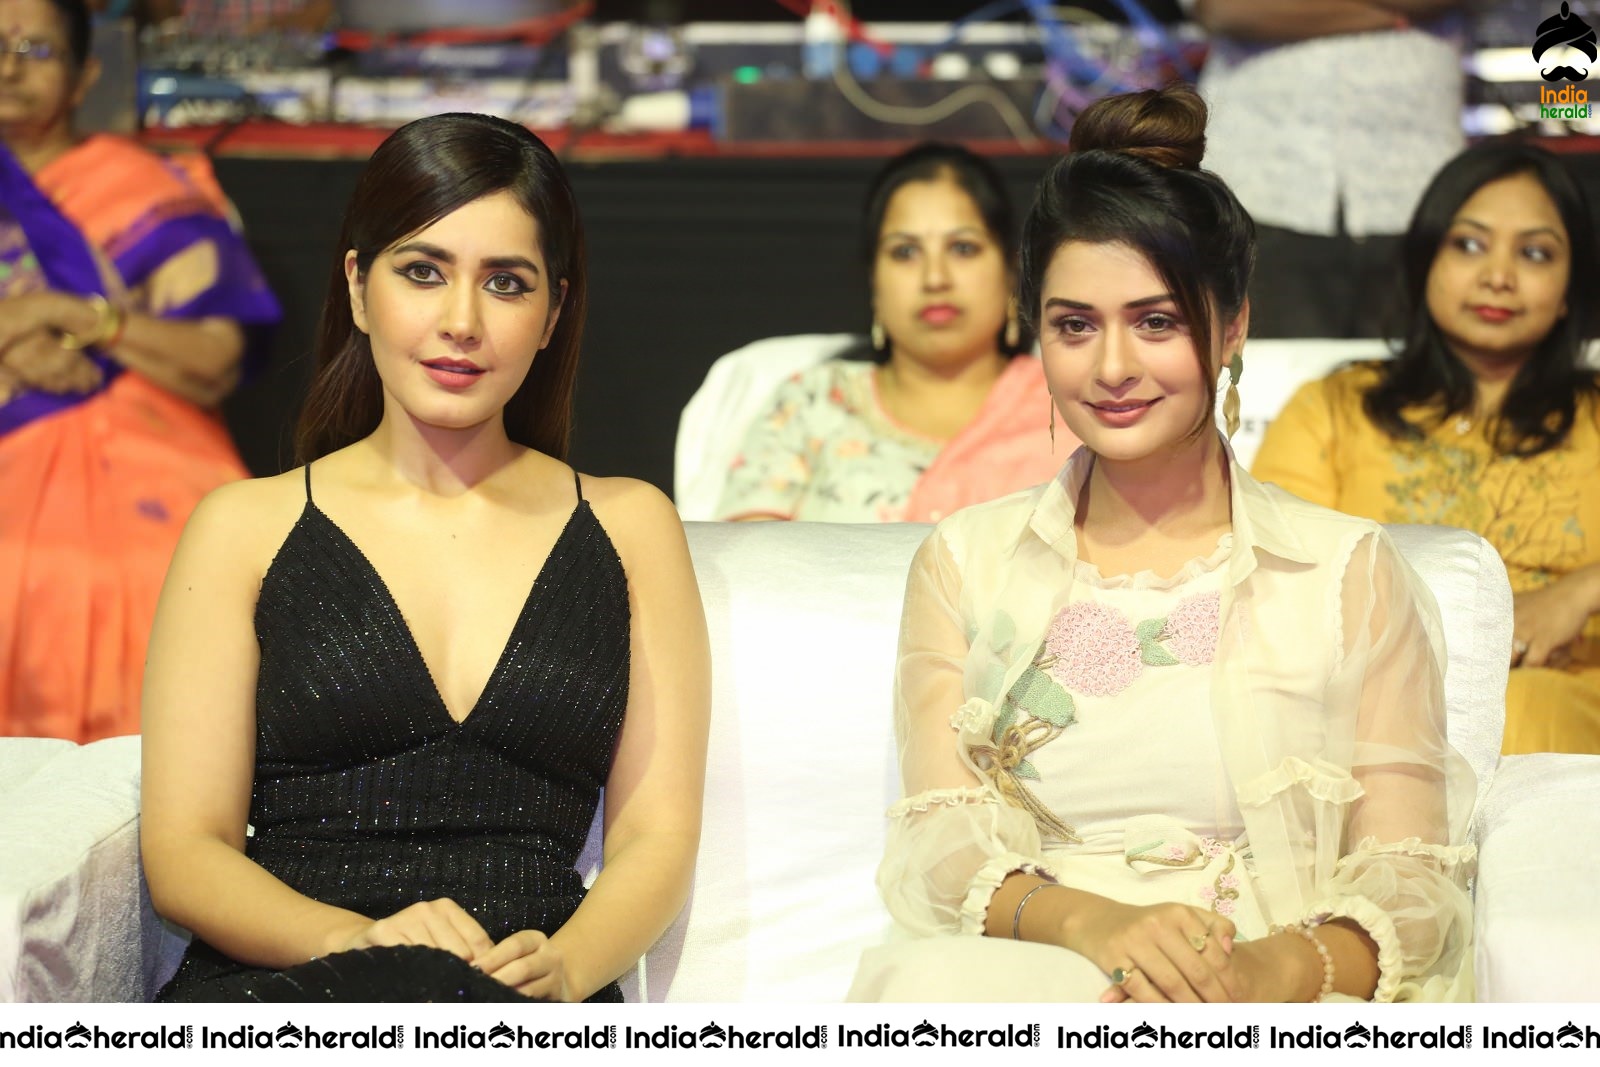 Raashi Khanna Slaying it in Black and she is all smiles Set 2